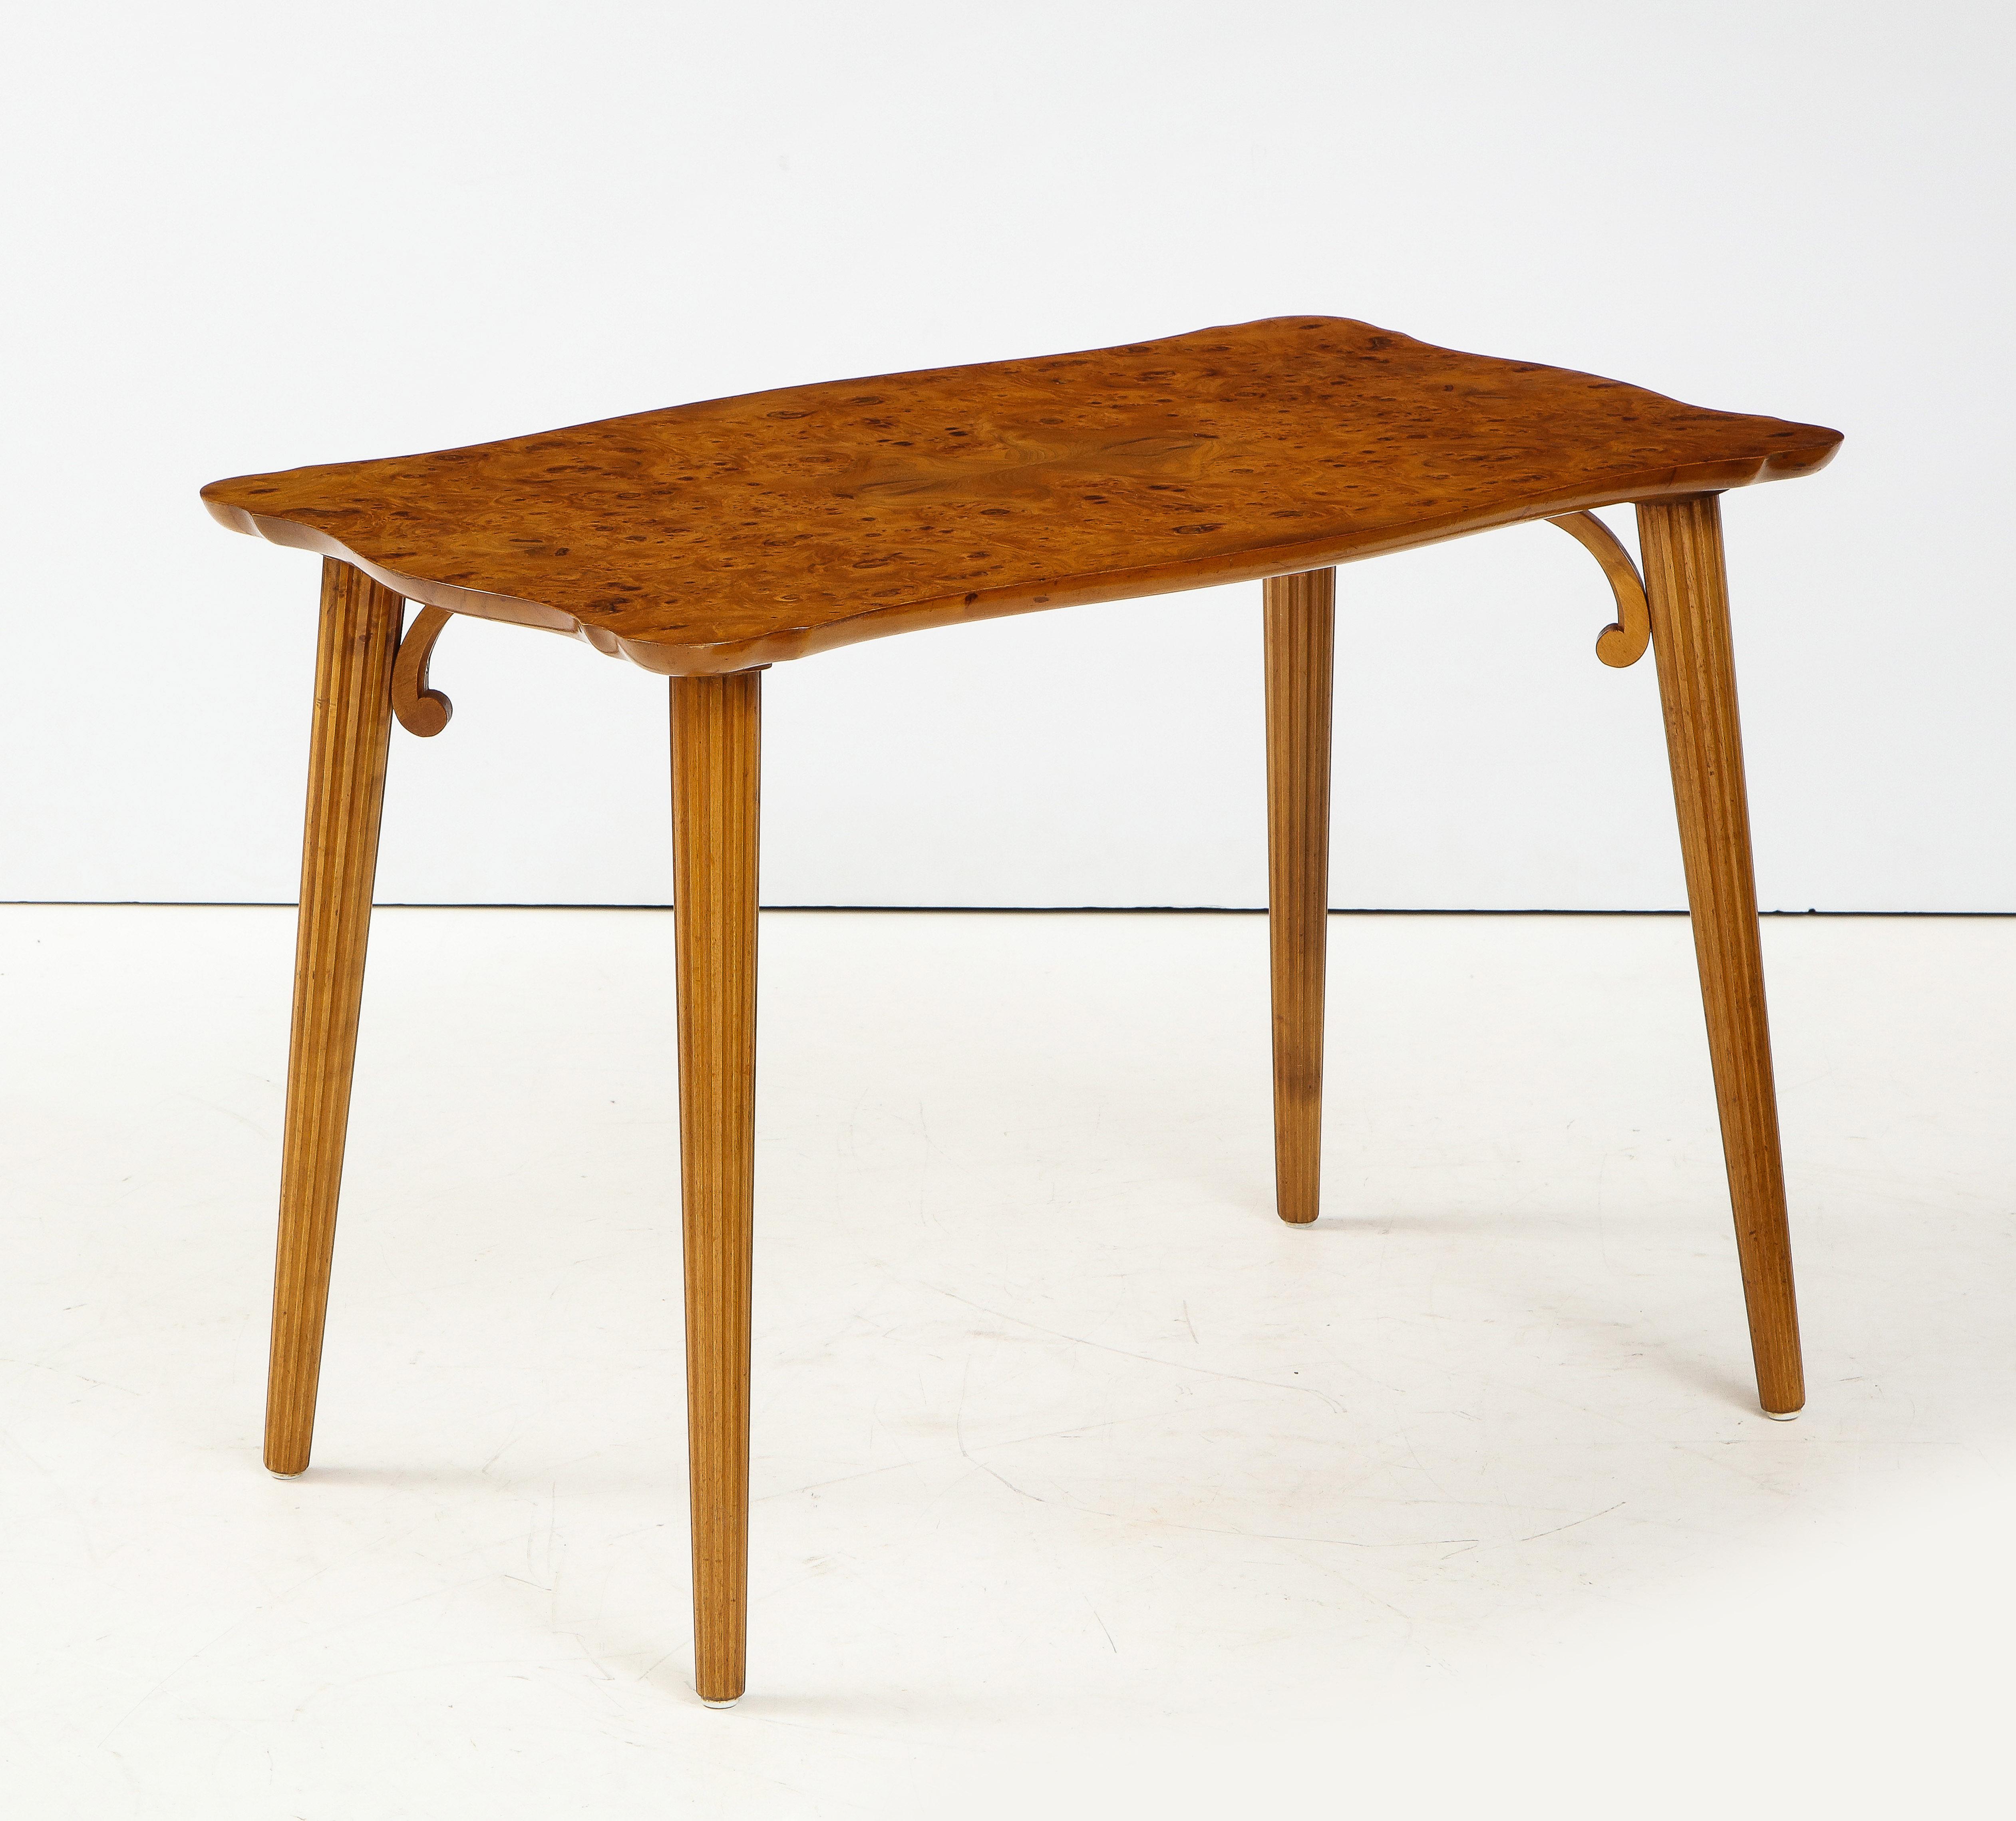 A Swedish Modern burr birch side table, Circa 1940s, the figured burr birch rectangular top with a shaped edge raised on circular tapered and fluted legs headed with a scrolled support.